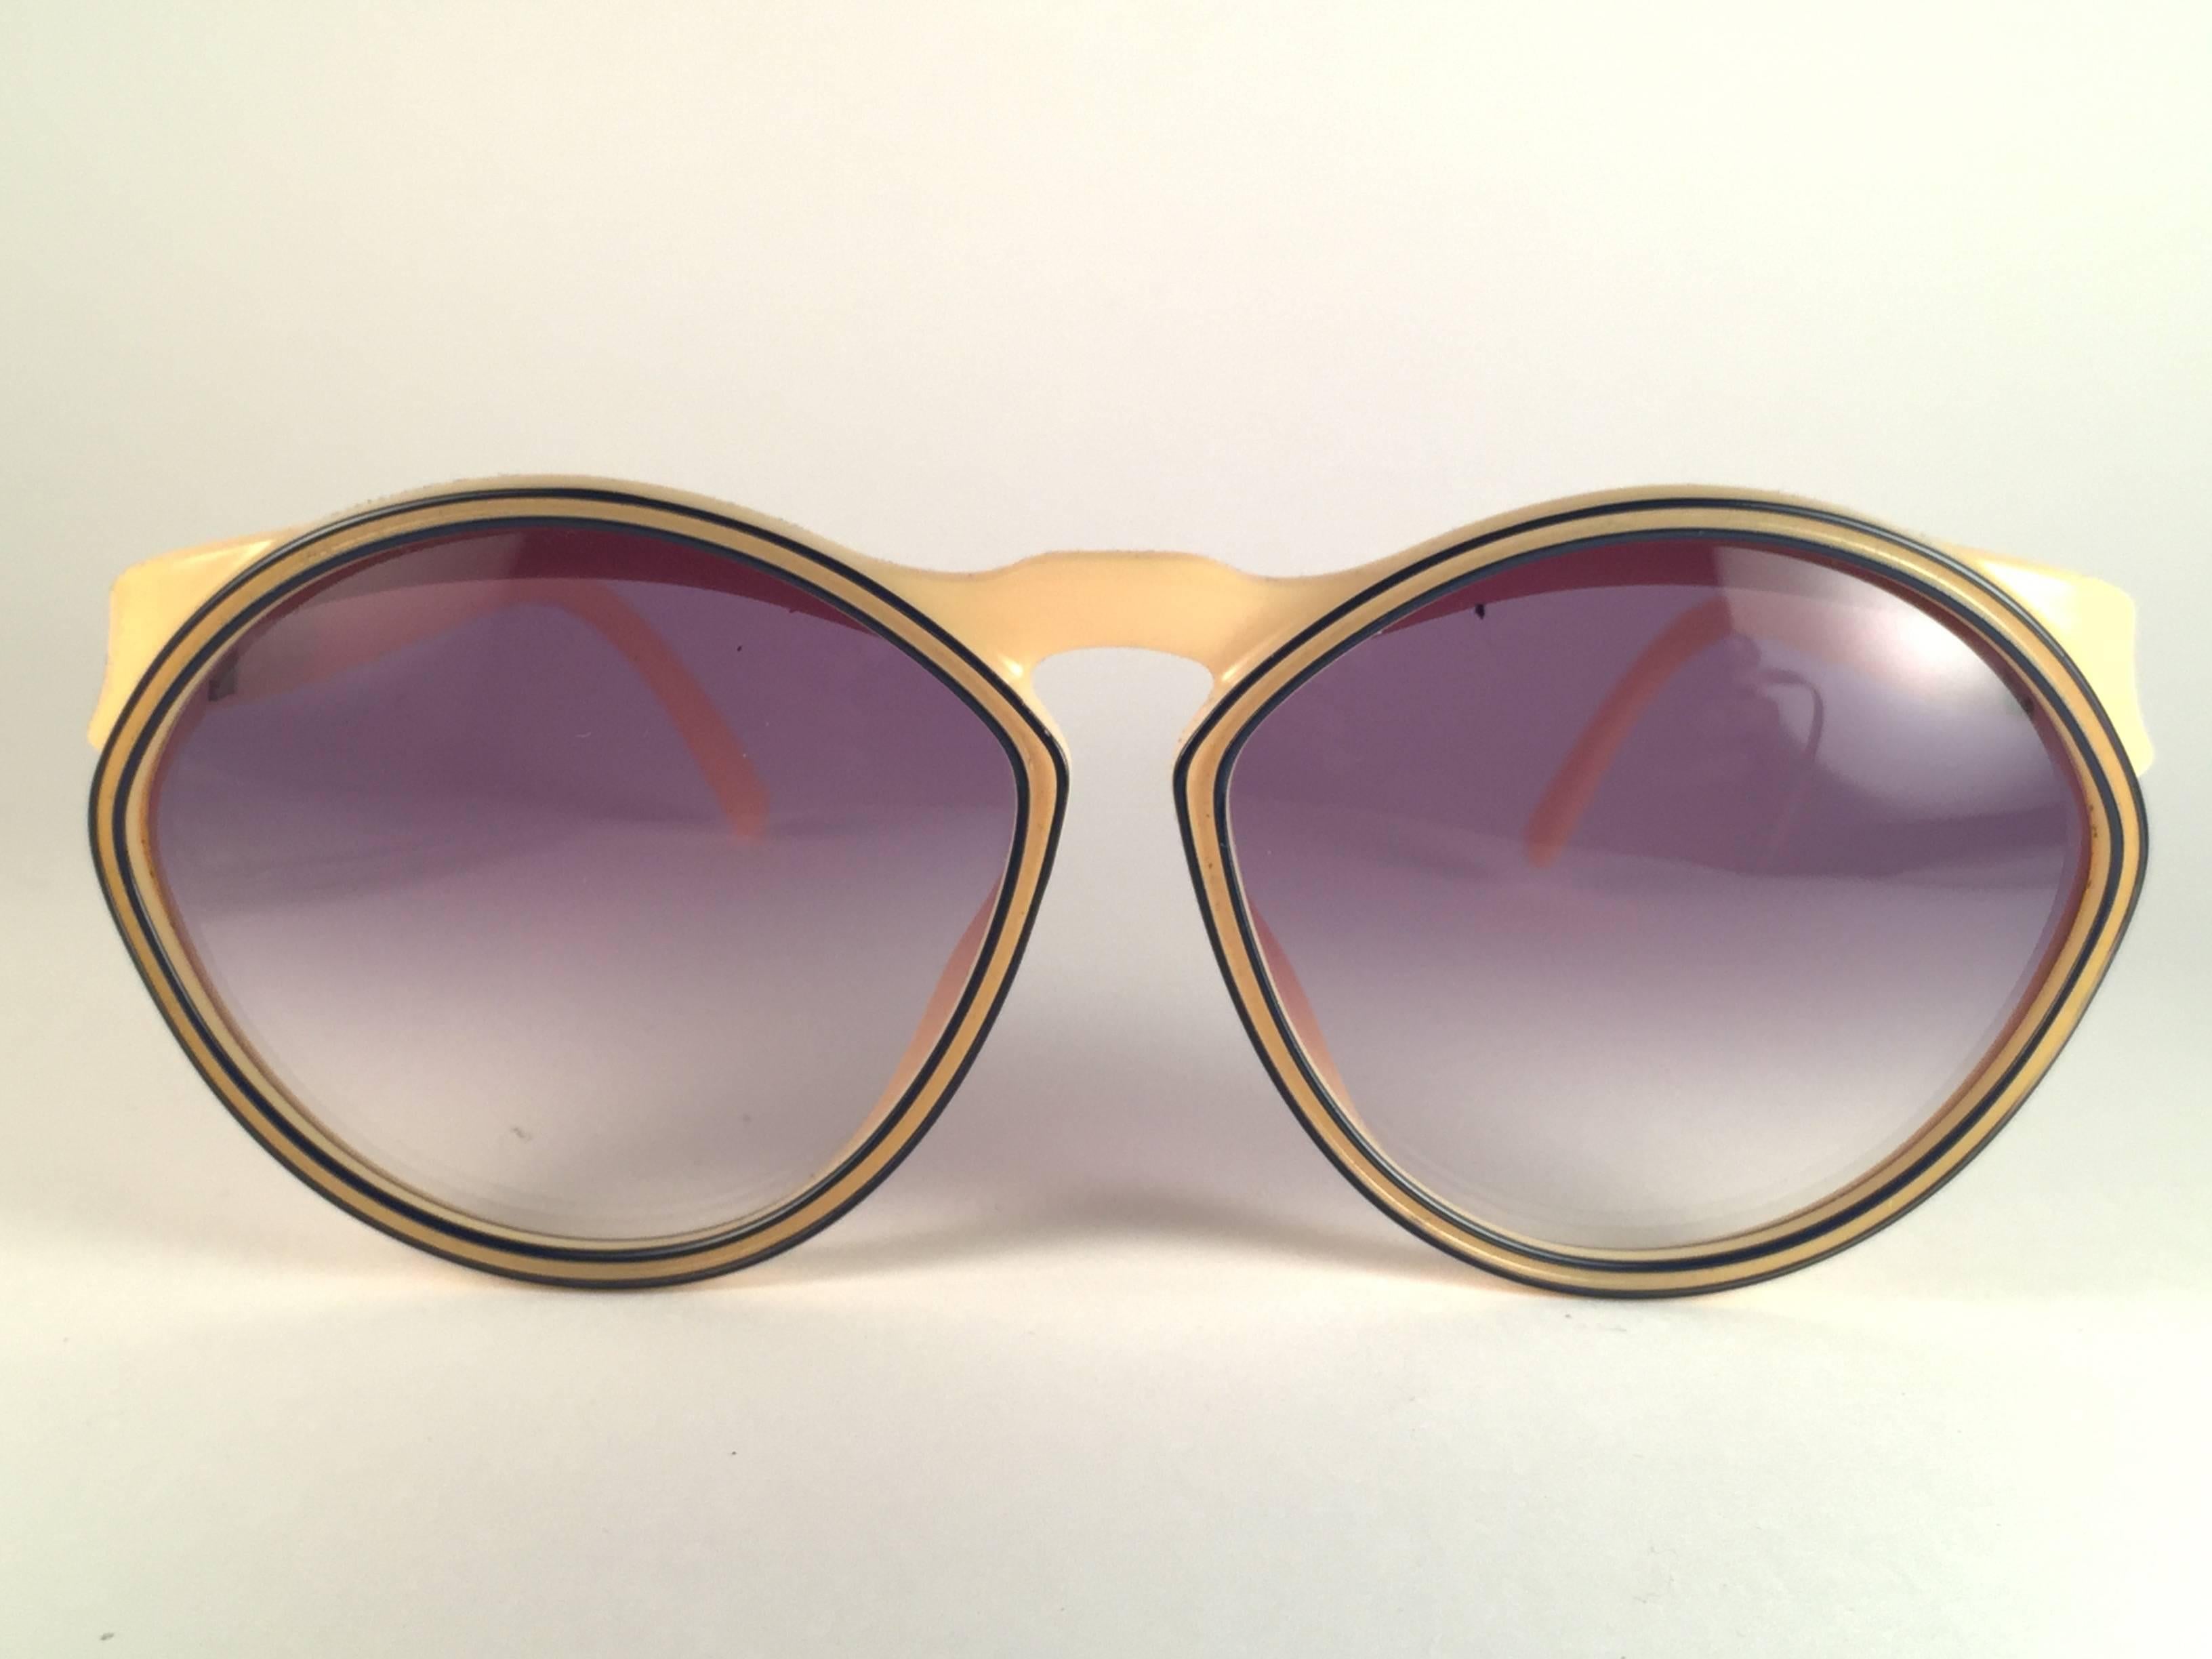 New Vintage Christian Dior 2156 70 Beige with blue  accents frame with spotless light blue gradient lenses.   
Made in Germany.  
Produced and design in 1970's.  
New, never worn or displayed. Comes with its original silver Christian Dior Lunettes